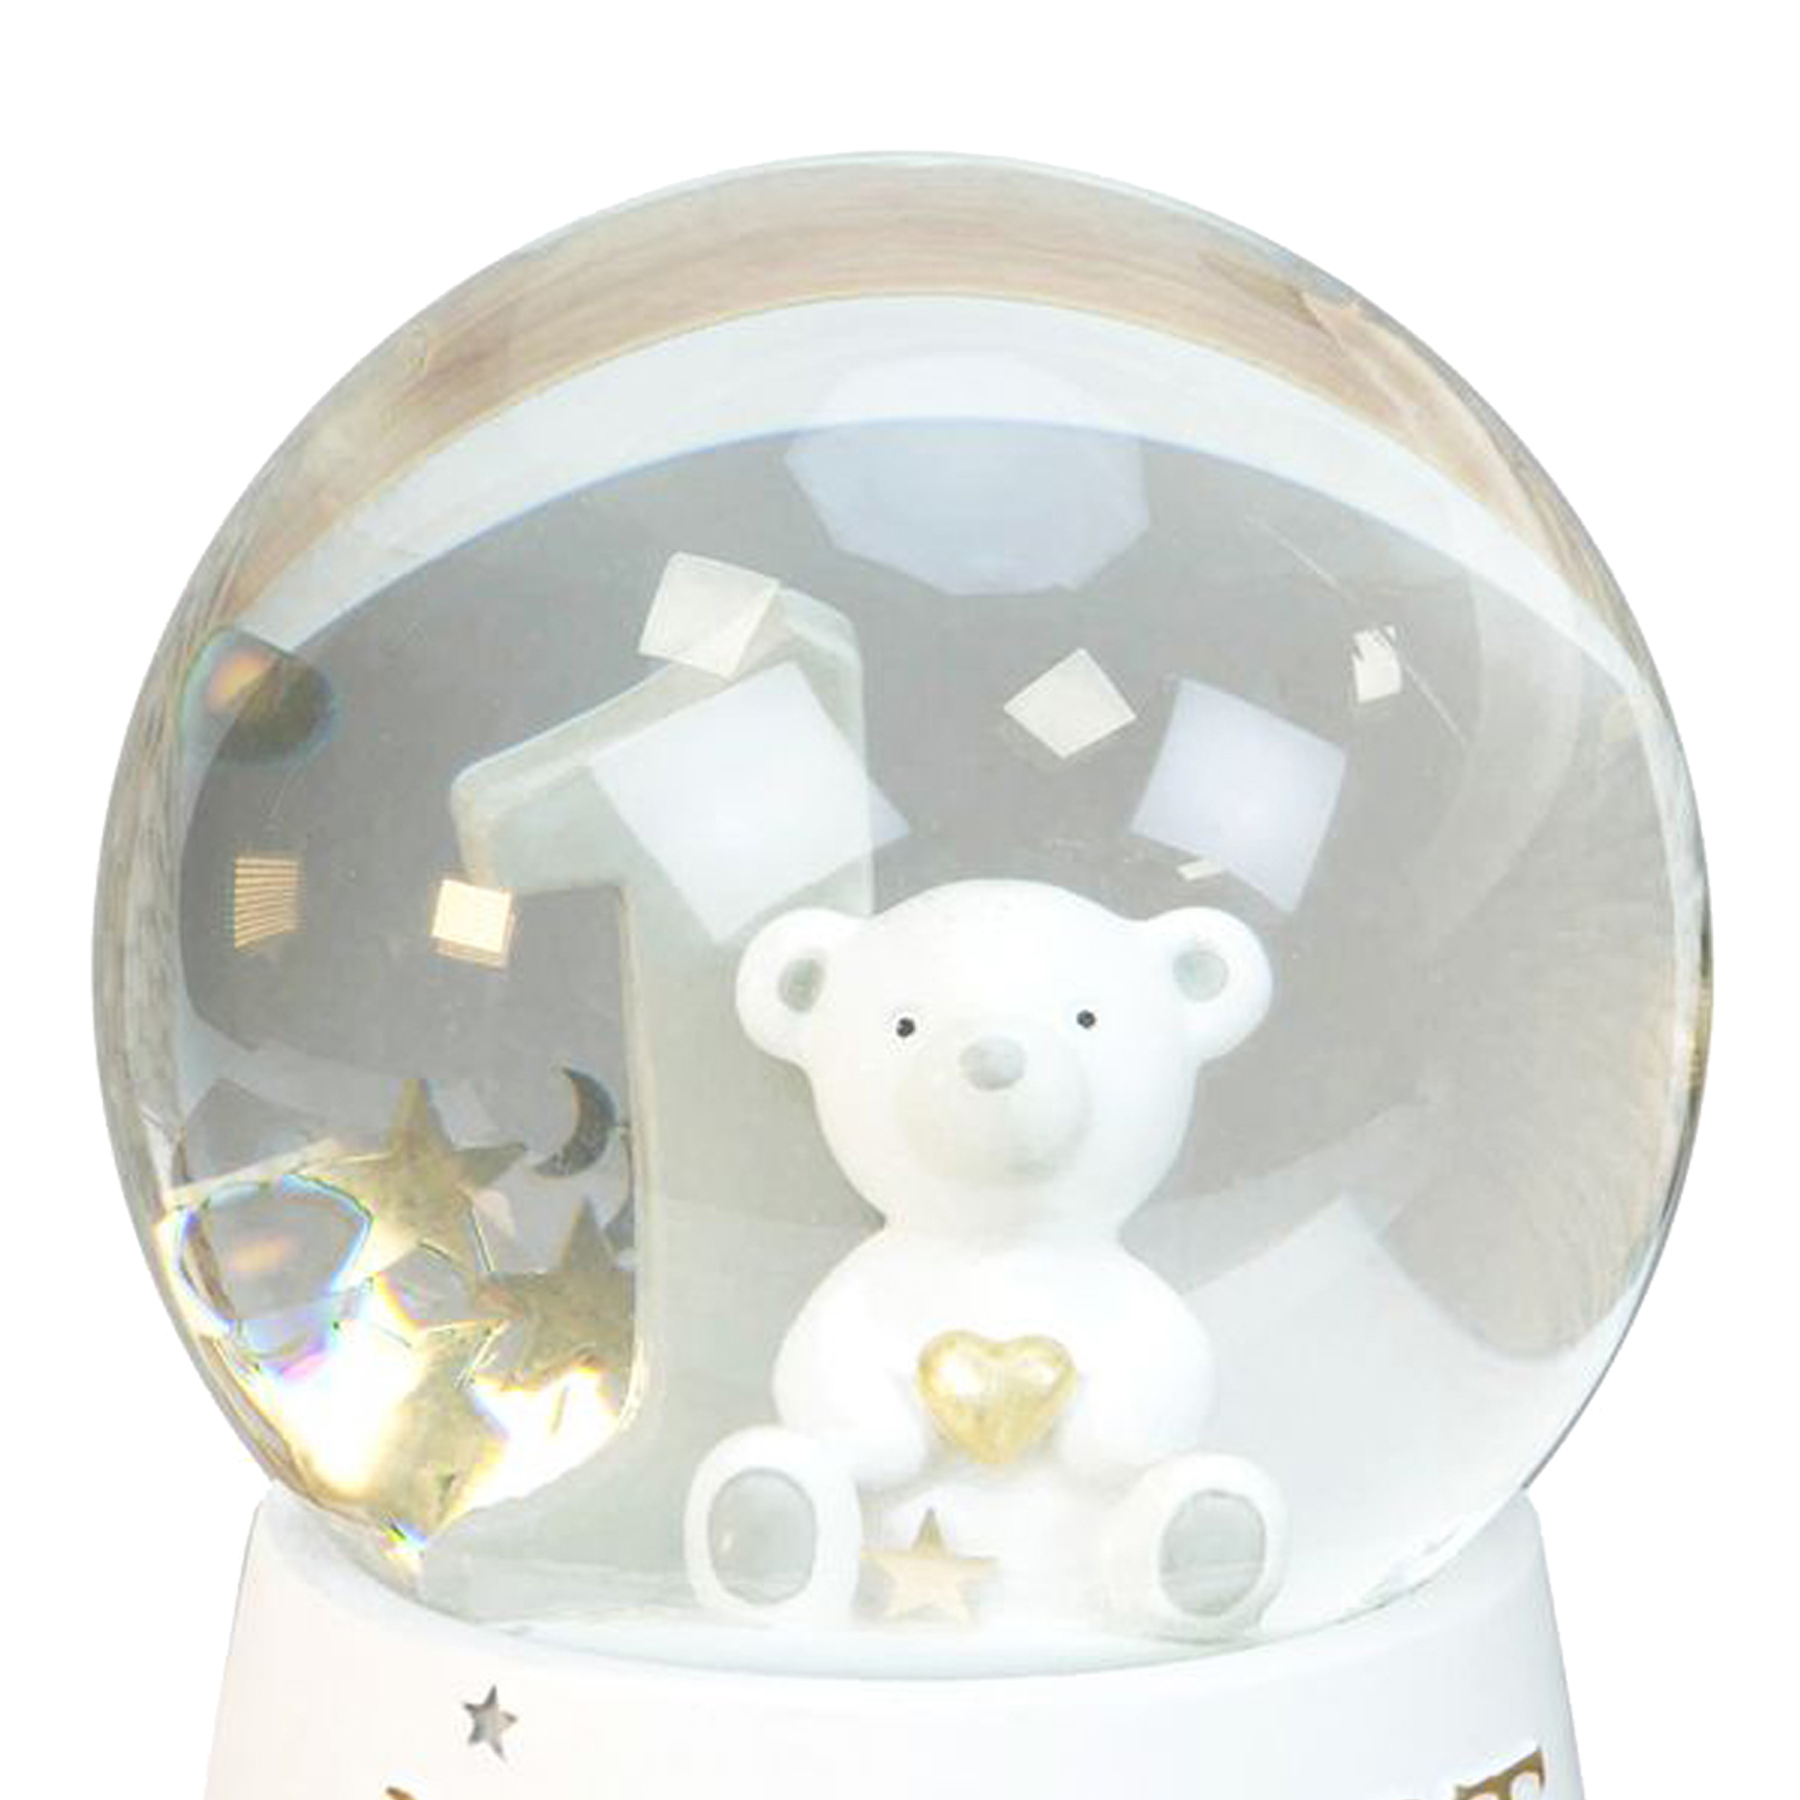 Unisex Baby's Snow Globe with Teddy My First Birthday - White and Silver